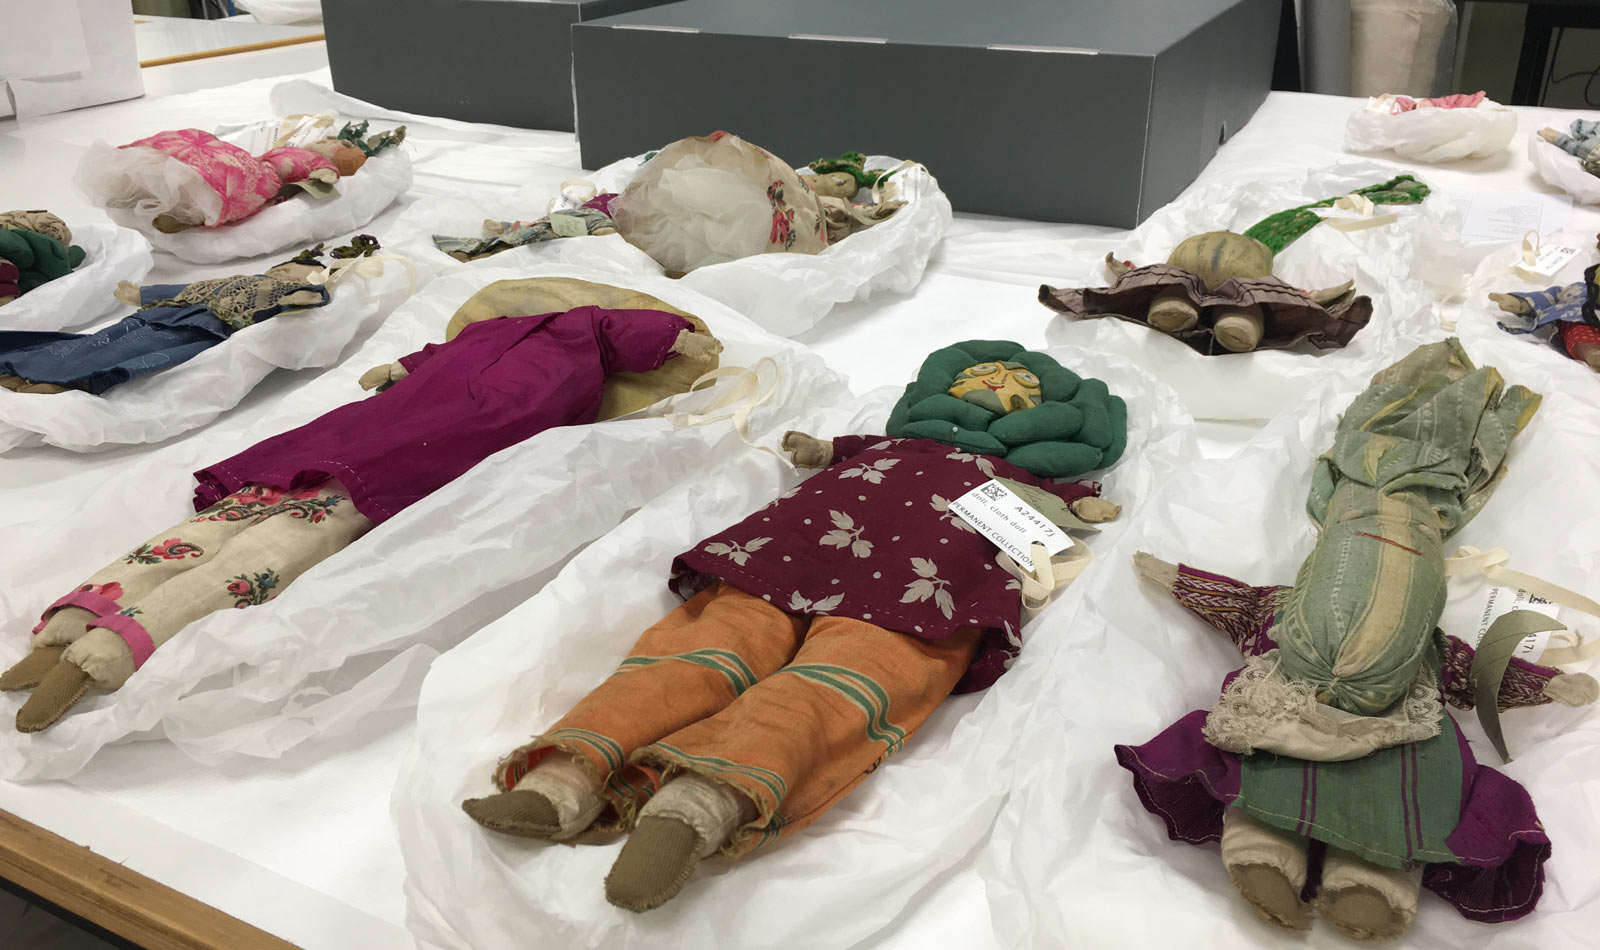 The dolls laid out on tissue padding waiting for humidification to remove creasing.